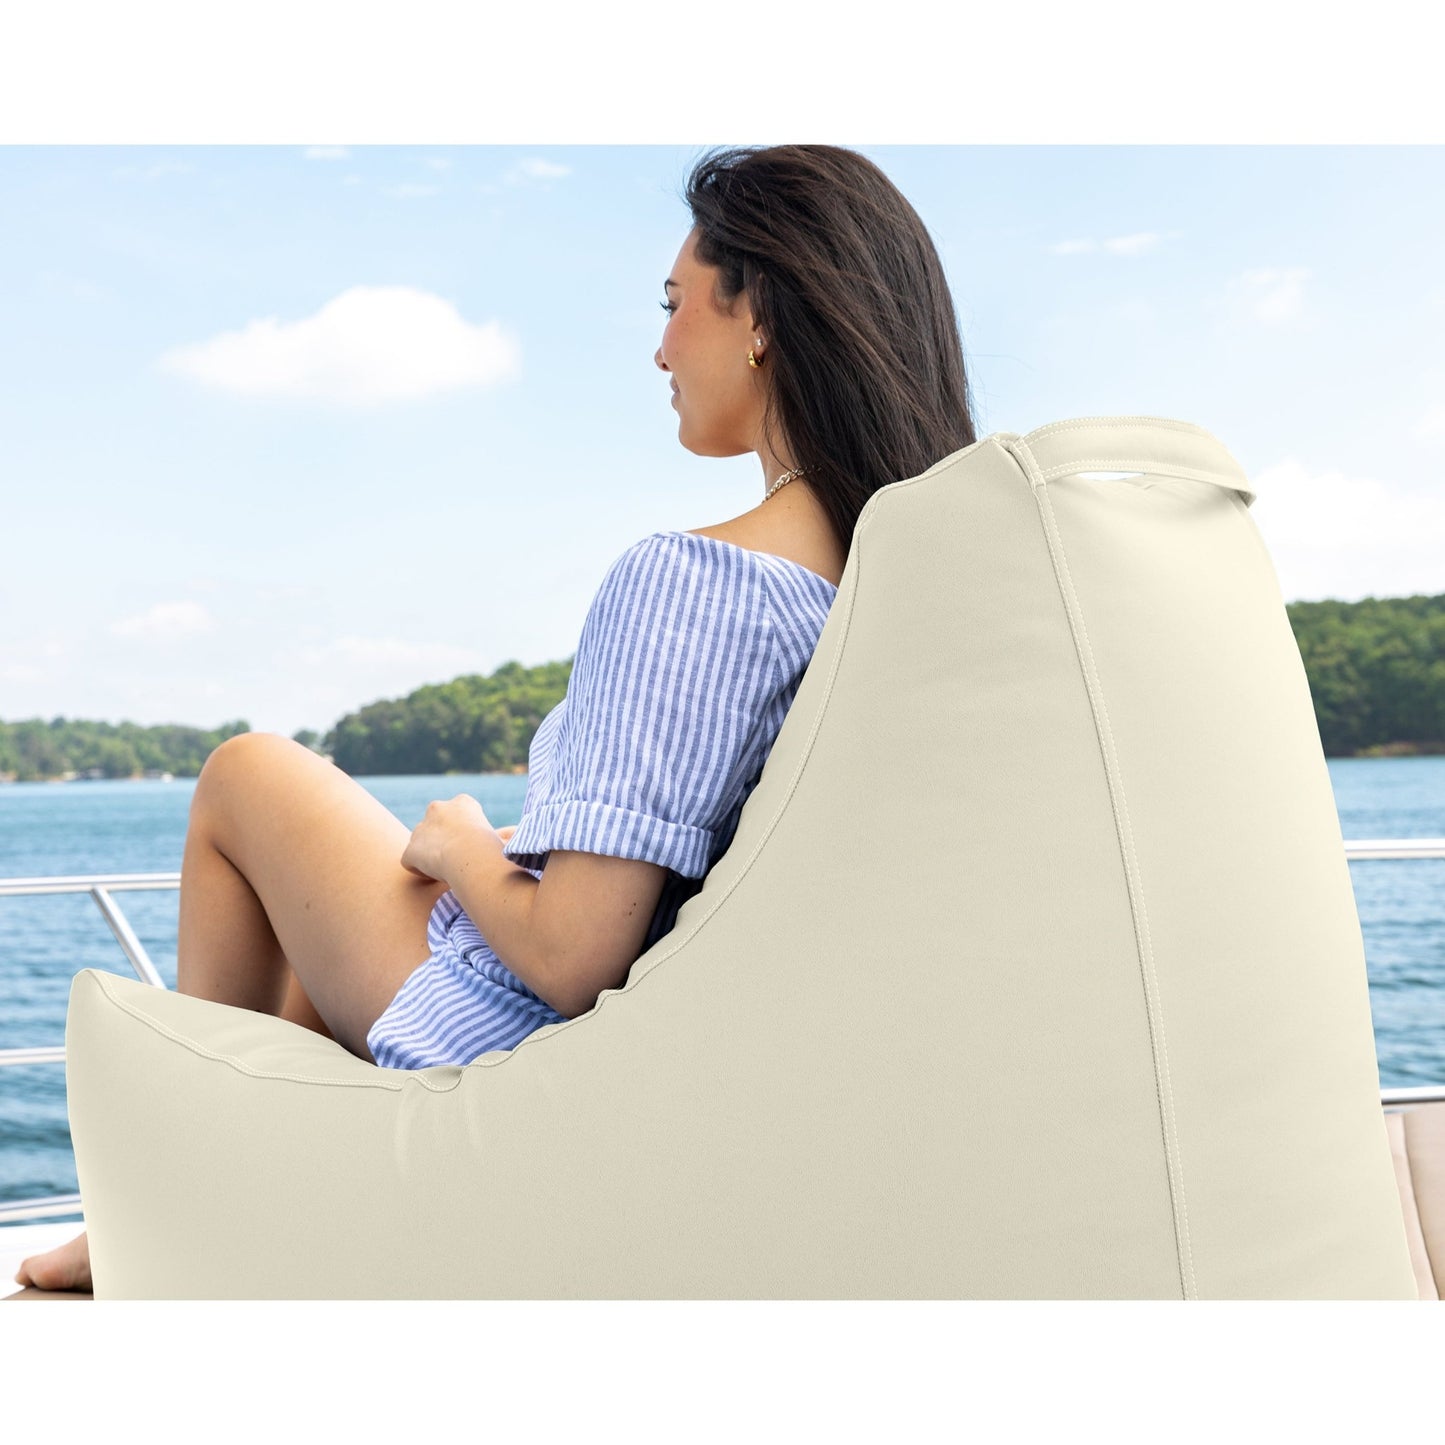 Jaxx Juniper Nautical Edition - Casual Bean Bag Seating for Boat, Yacht & Watersports (19499) - SchoolOutlet